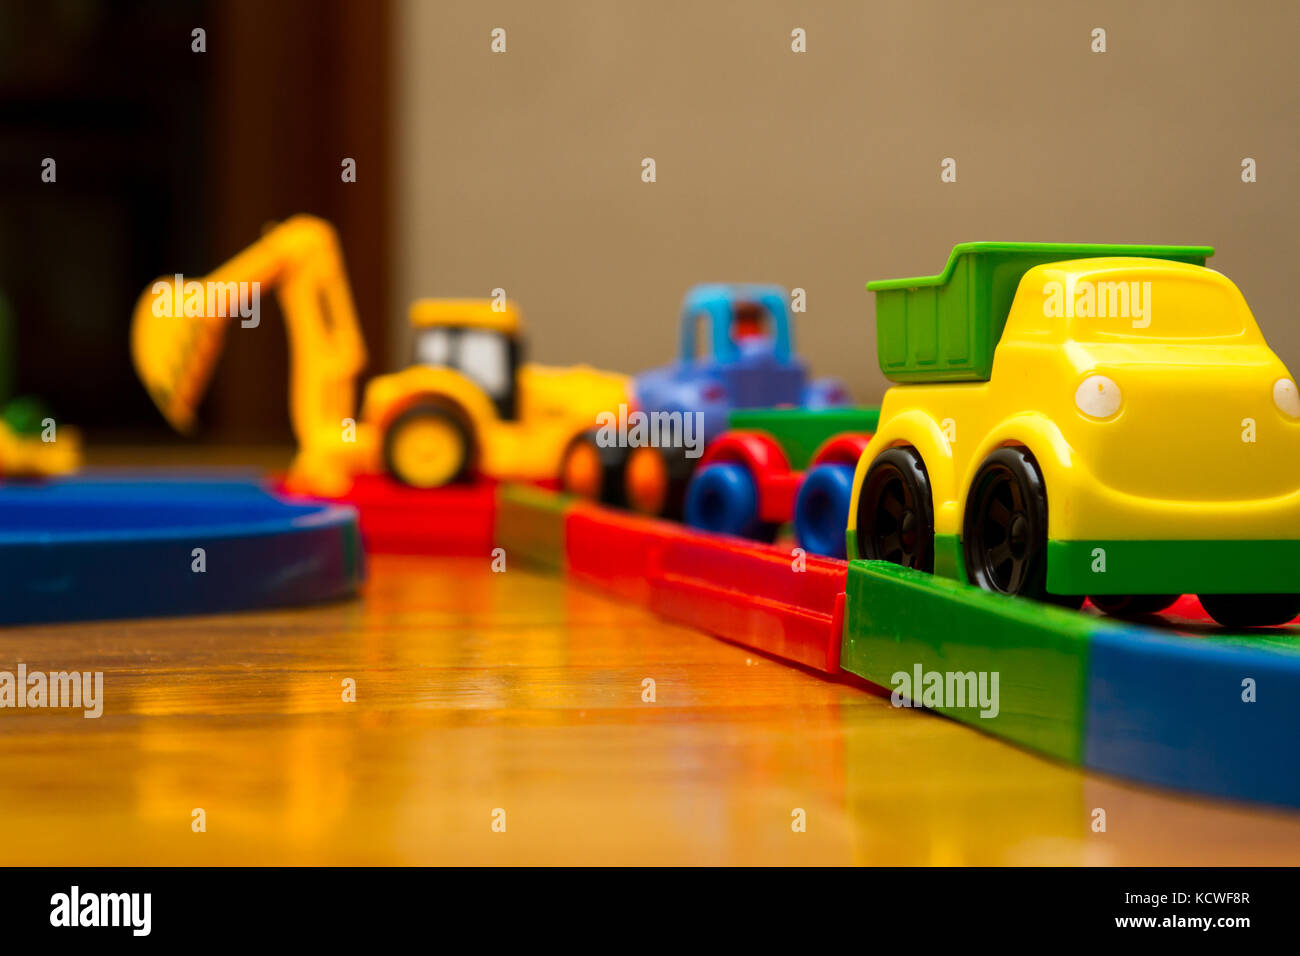 Children's road for machines in the room Stock Photo